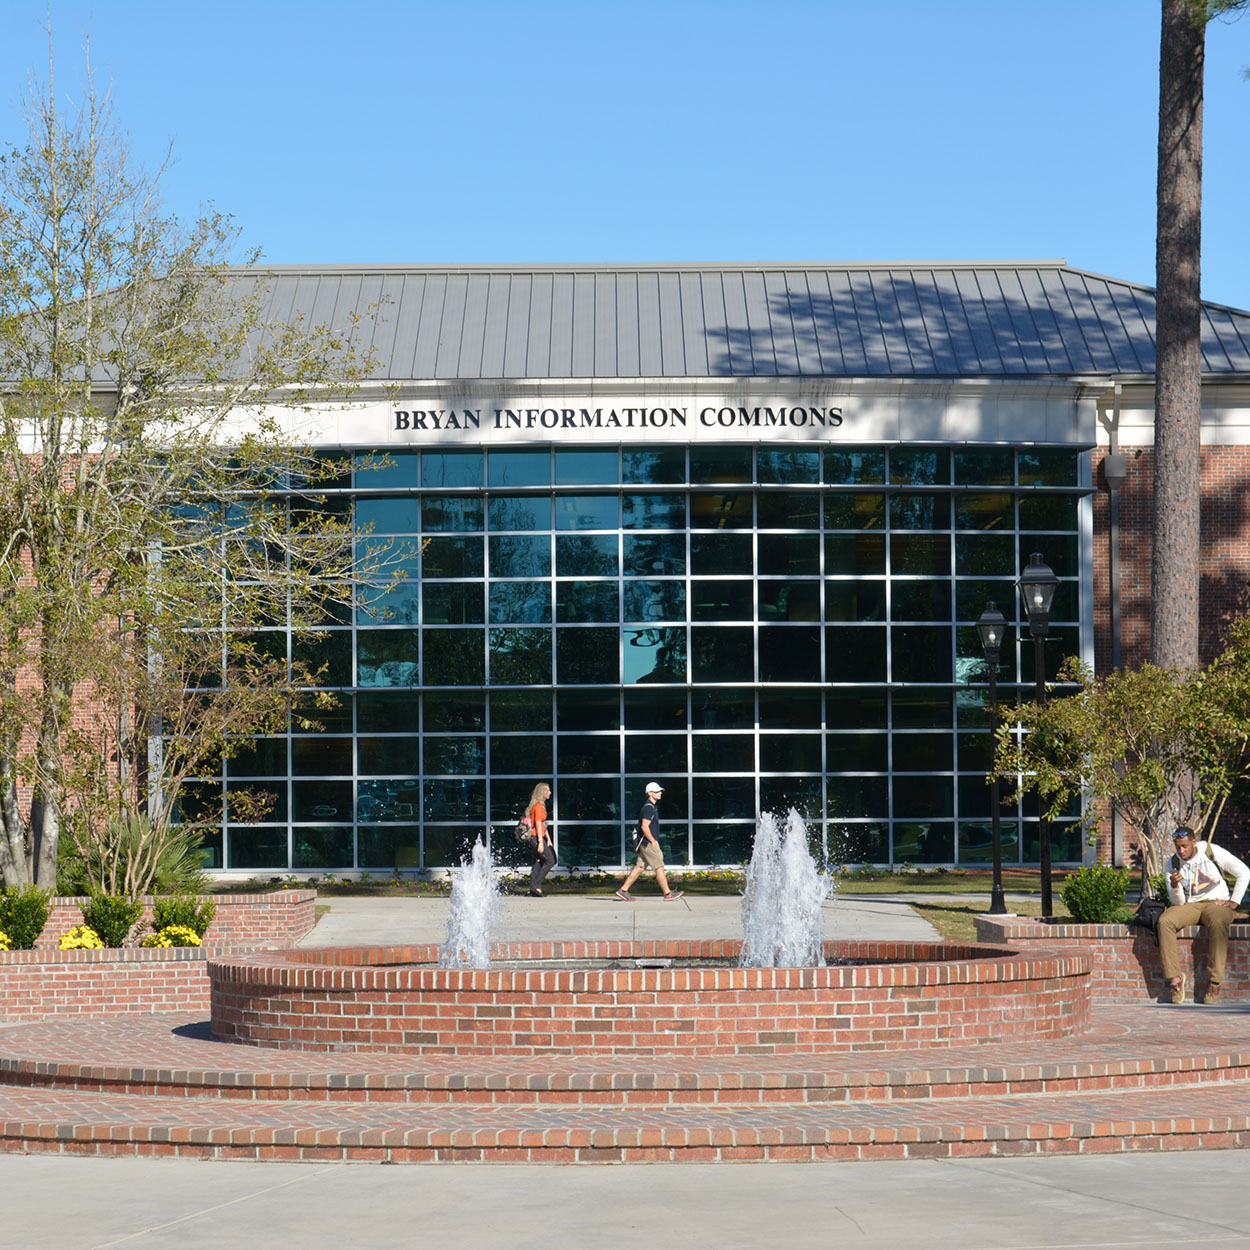 The Bryan Information Commons at CCU.